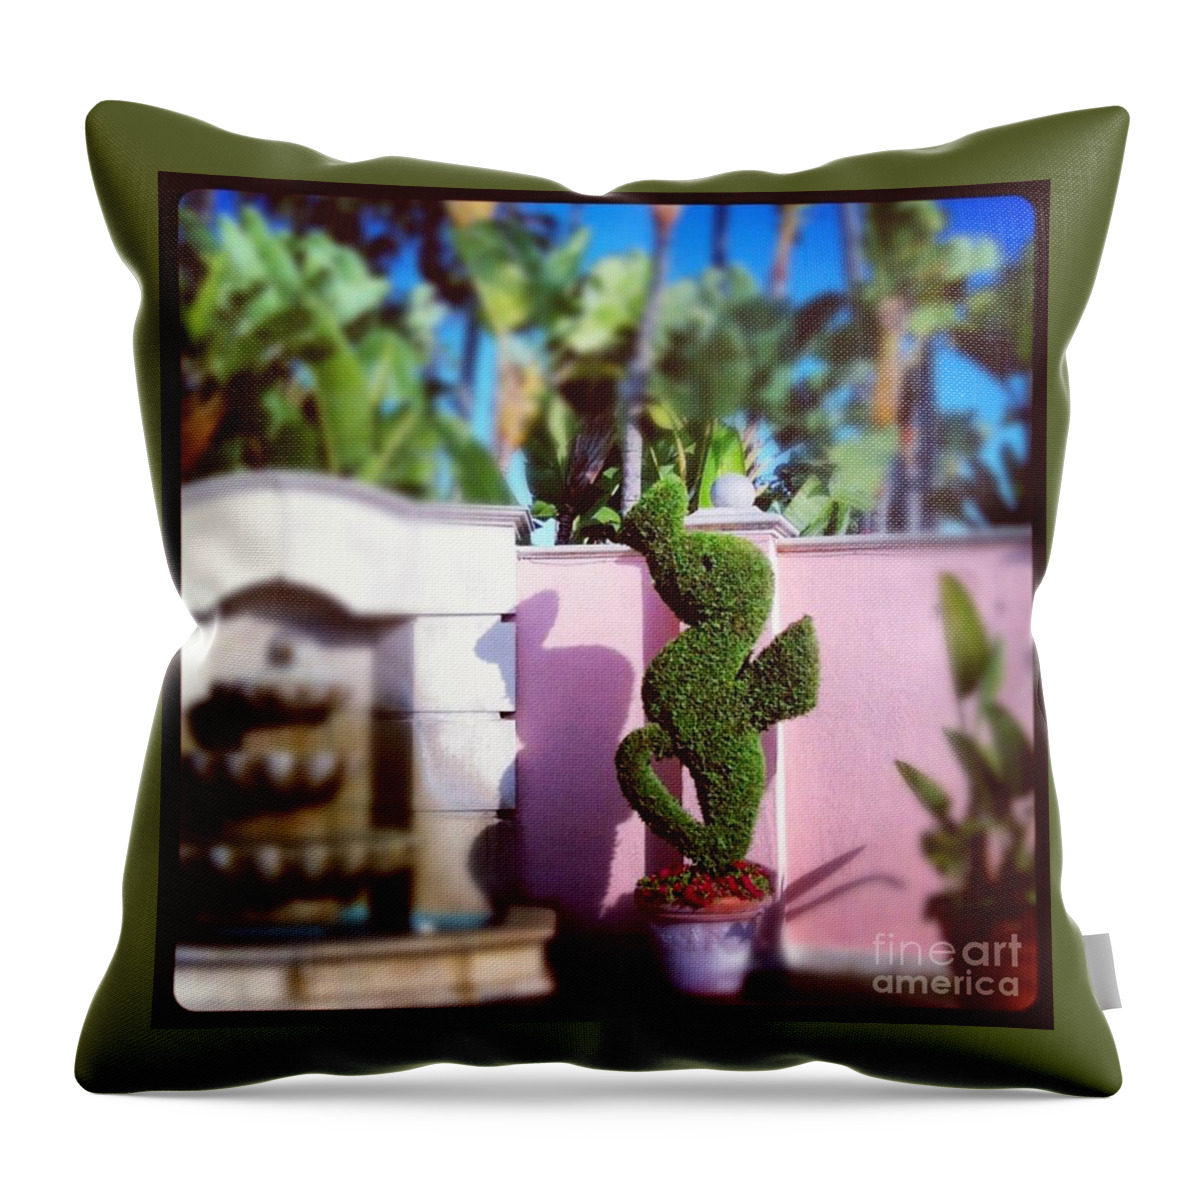 Seahorse Throw Pillow featuring the photograph Whimsy by Denise Railey